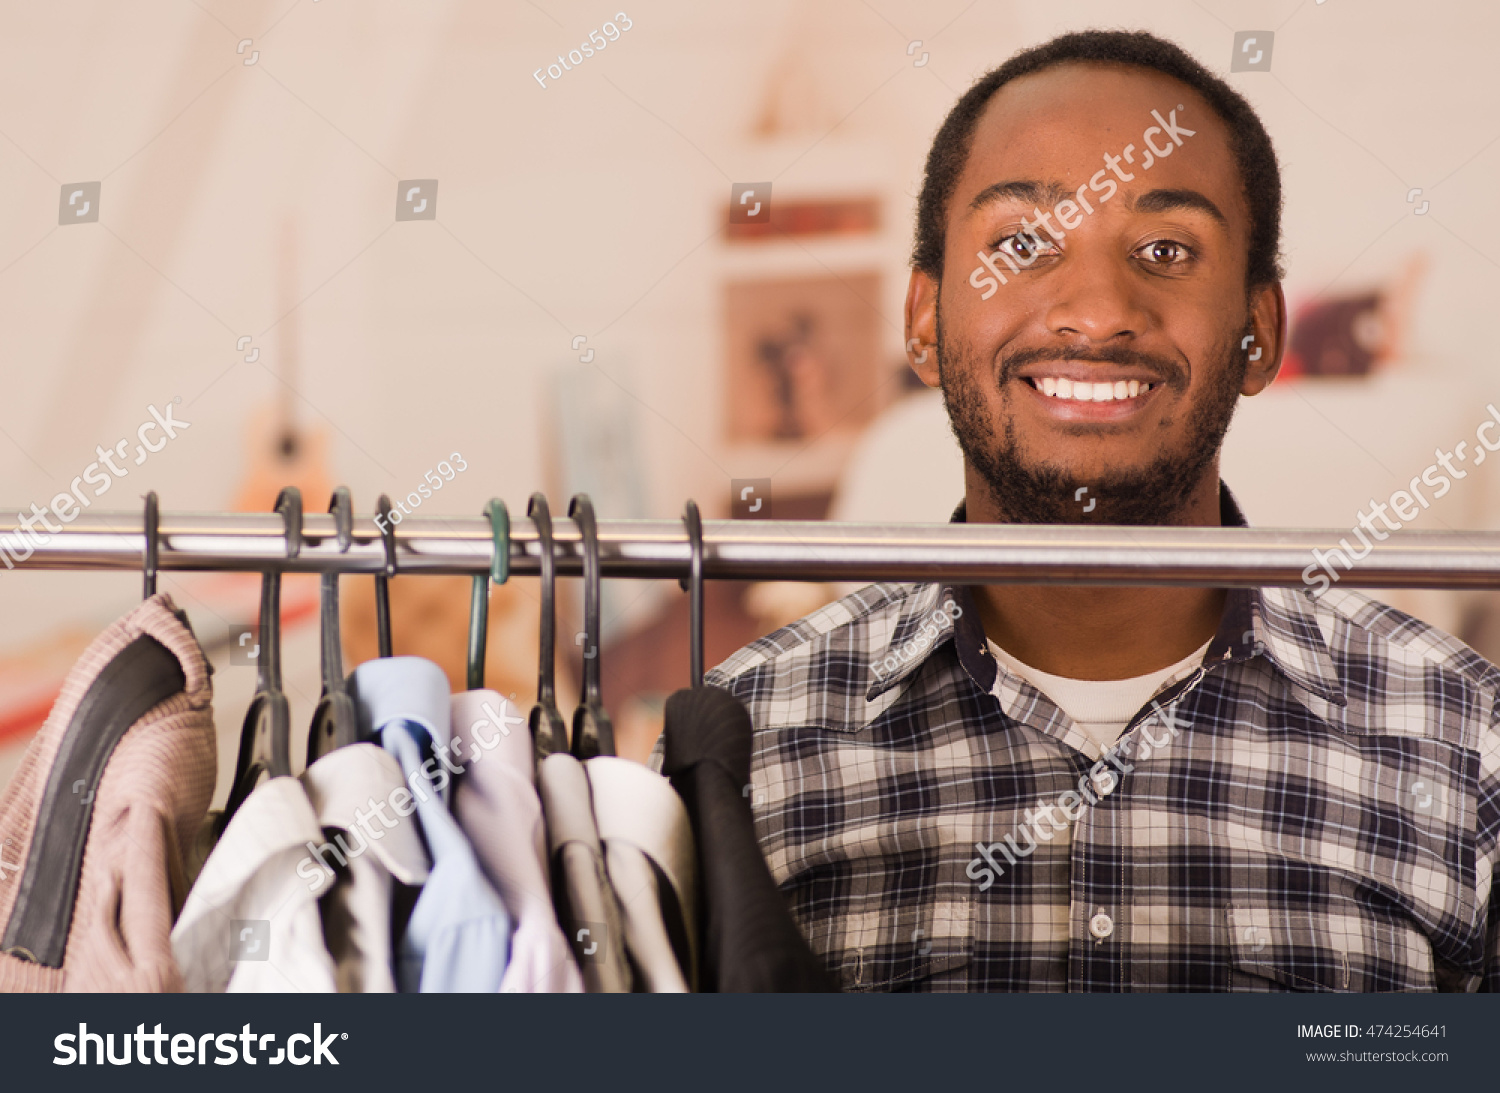 Handsome Young Man Standing Inside Wardrobe Stock Photo 474254641 ...